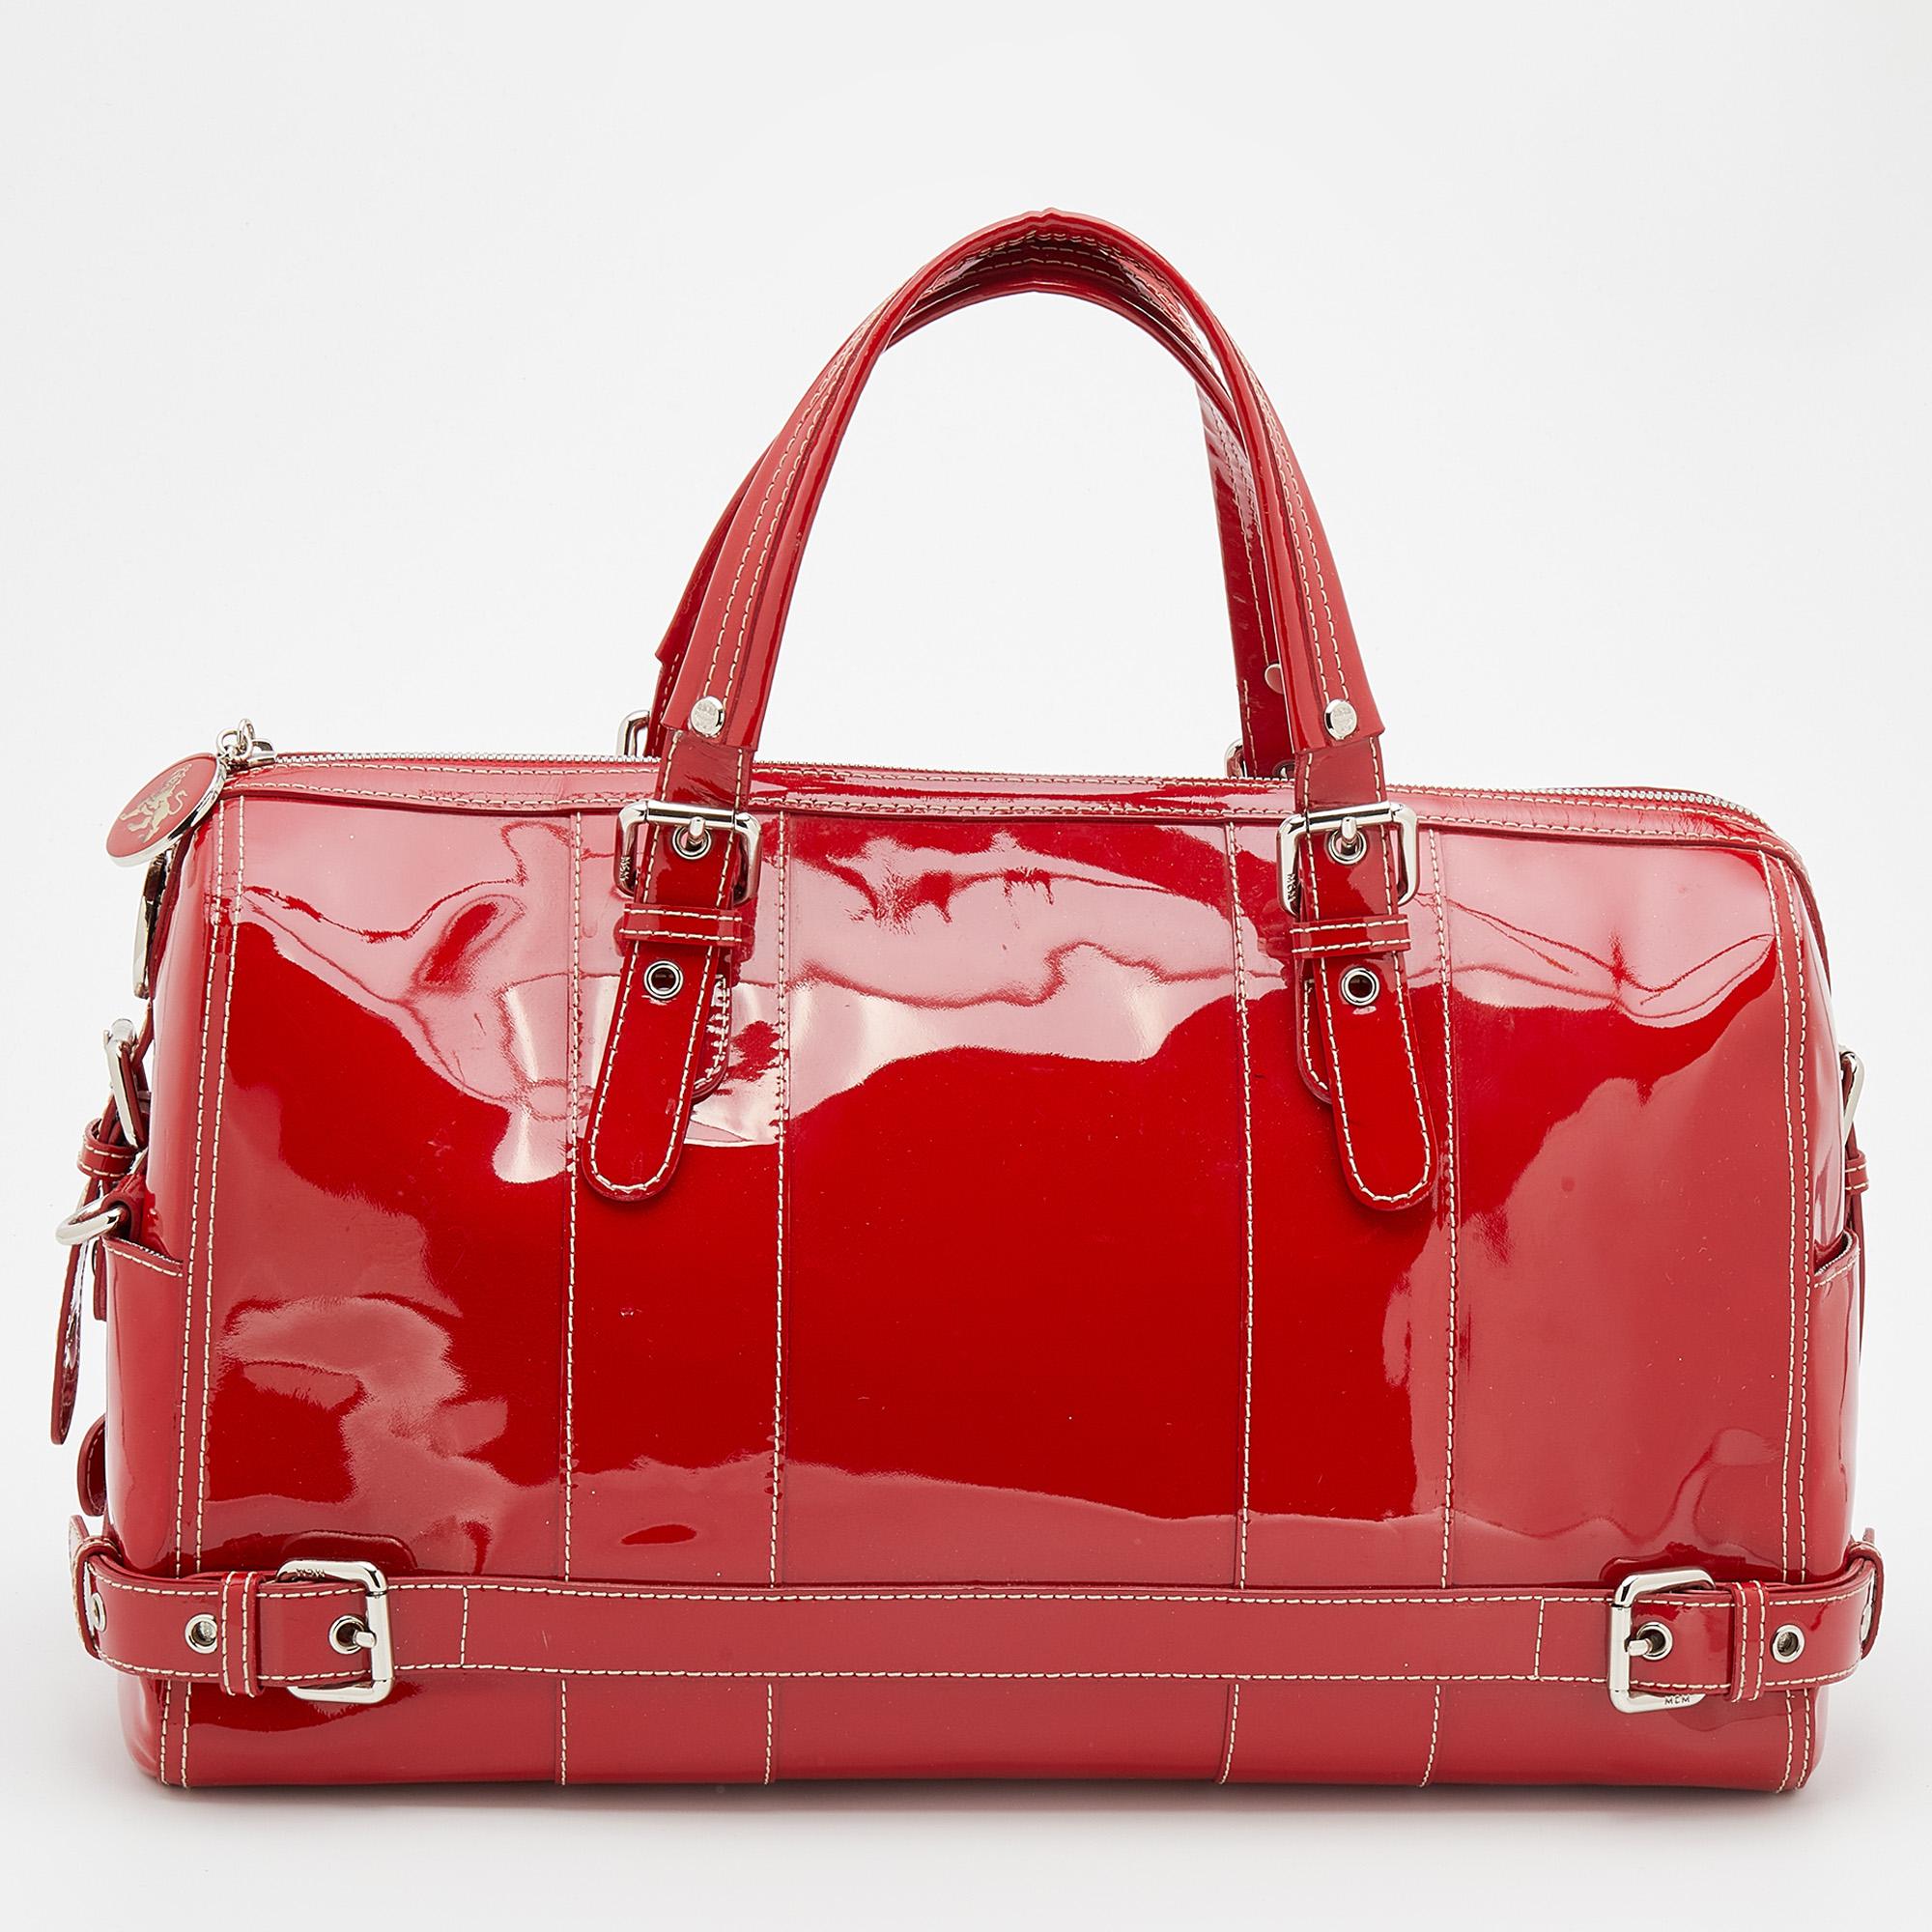 This MCM duffle bag is filled with functional details and is perfect for long days. Created from patent leather, it flaunts front exterior pockets with buckle detailing and its nylon-lined interior has more than enough space to house your daily